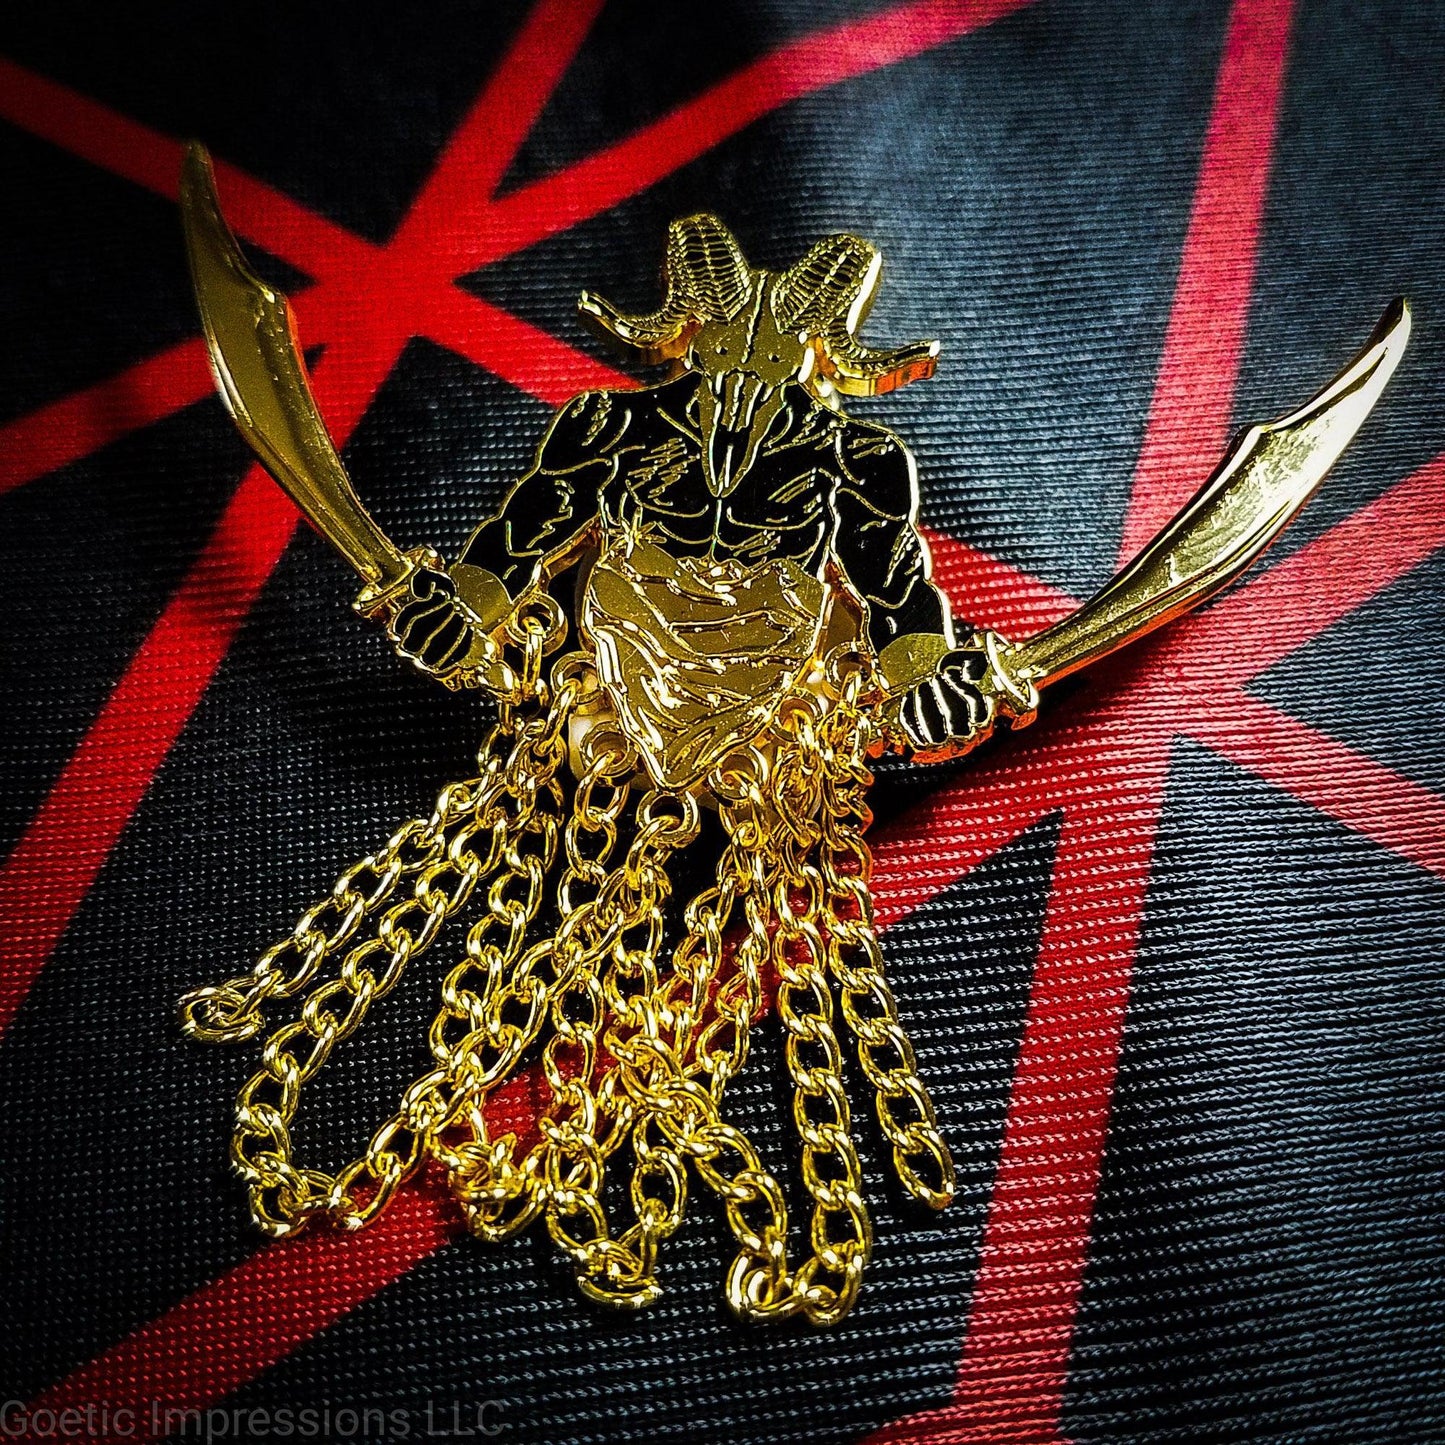 A black and gold hard enamel pin of the demon Azazel. Azazel is shown with the head of a ram skull and human torso brandishing a scimitar in each hand. Azazel is rising up over dunes of a desert.  The pin has chains dangling from it. It is placed on a red and black altar cloth with Azazel's sigil.